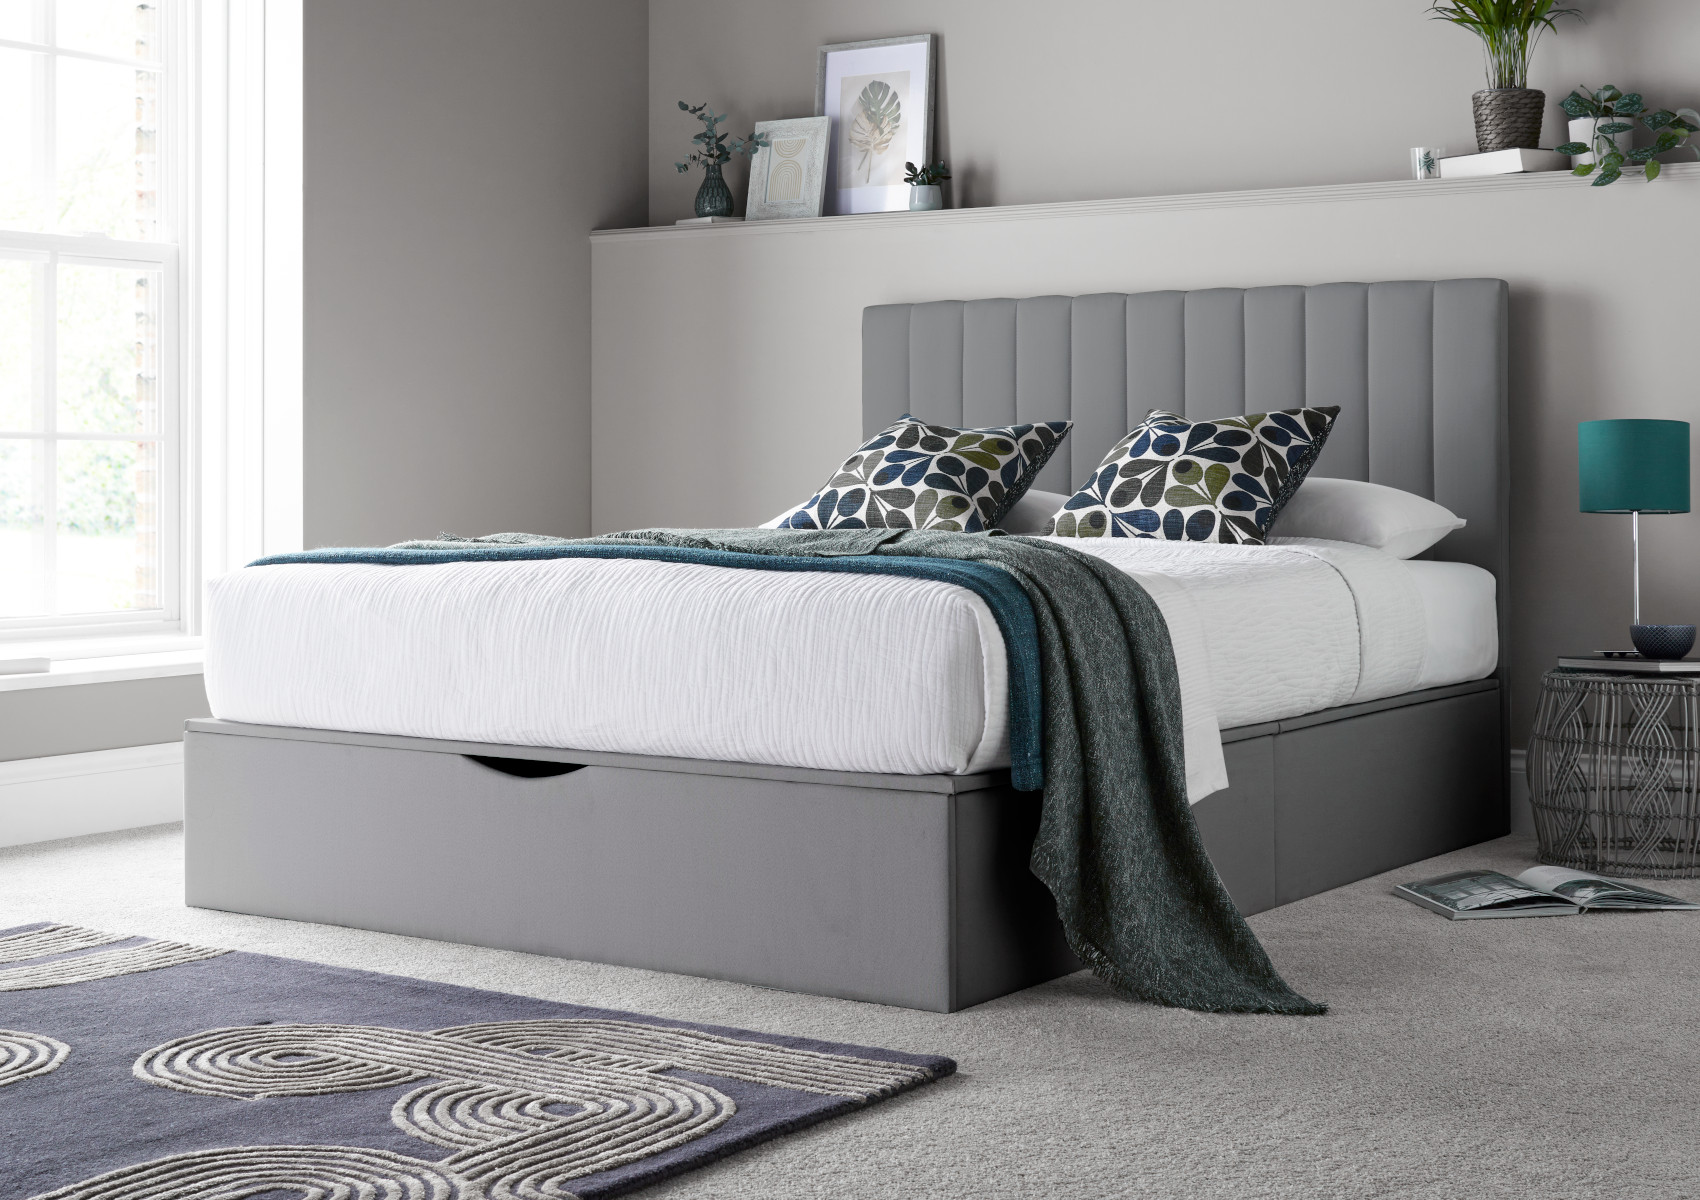 View Onelife Light Grey Upholstered Ottoman Bed Frame Time4Sleep information